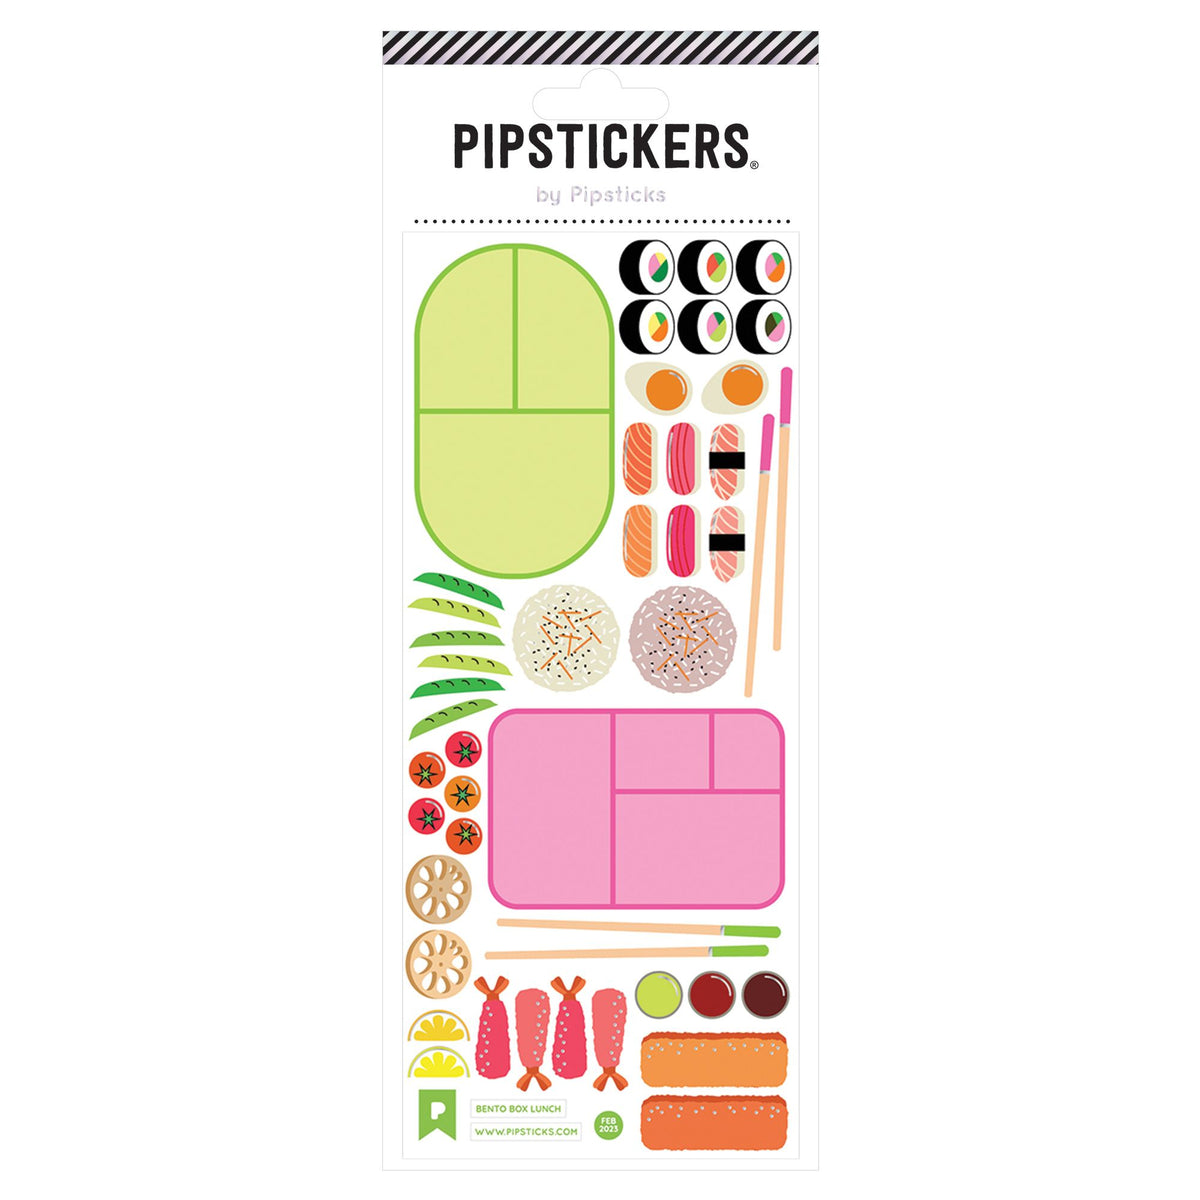 Pipstickers $4.99 Cover